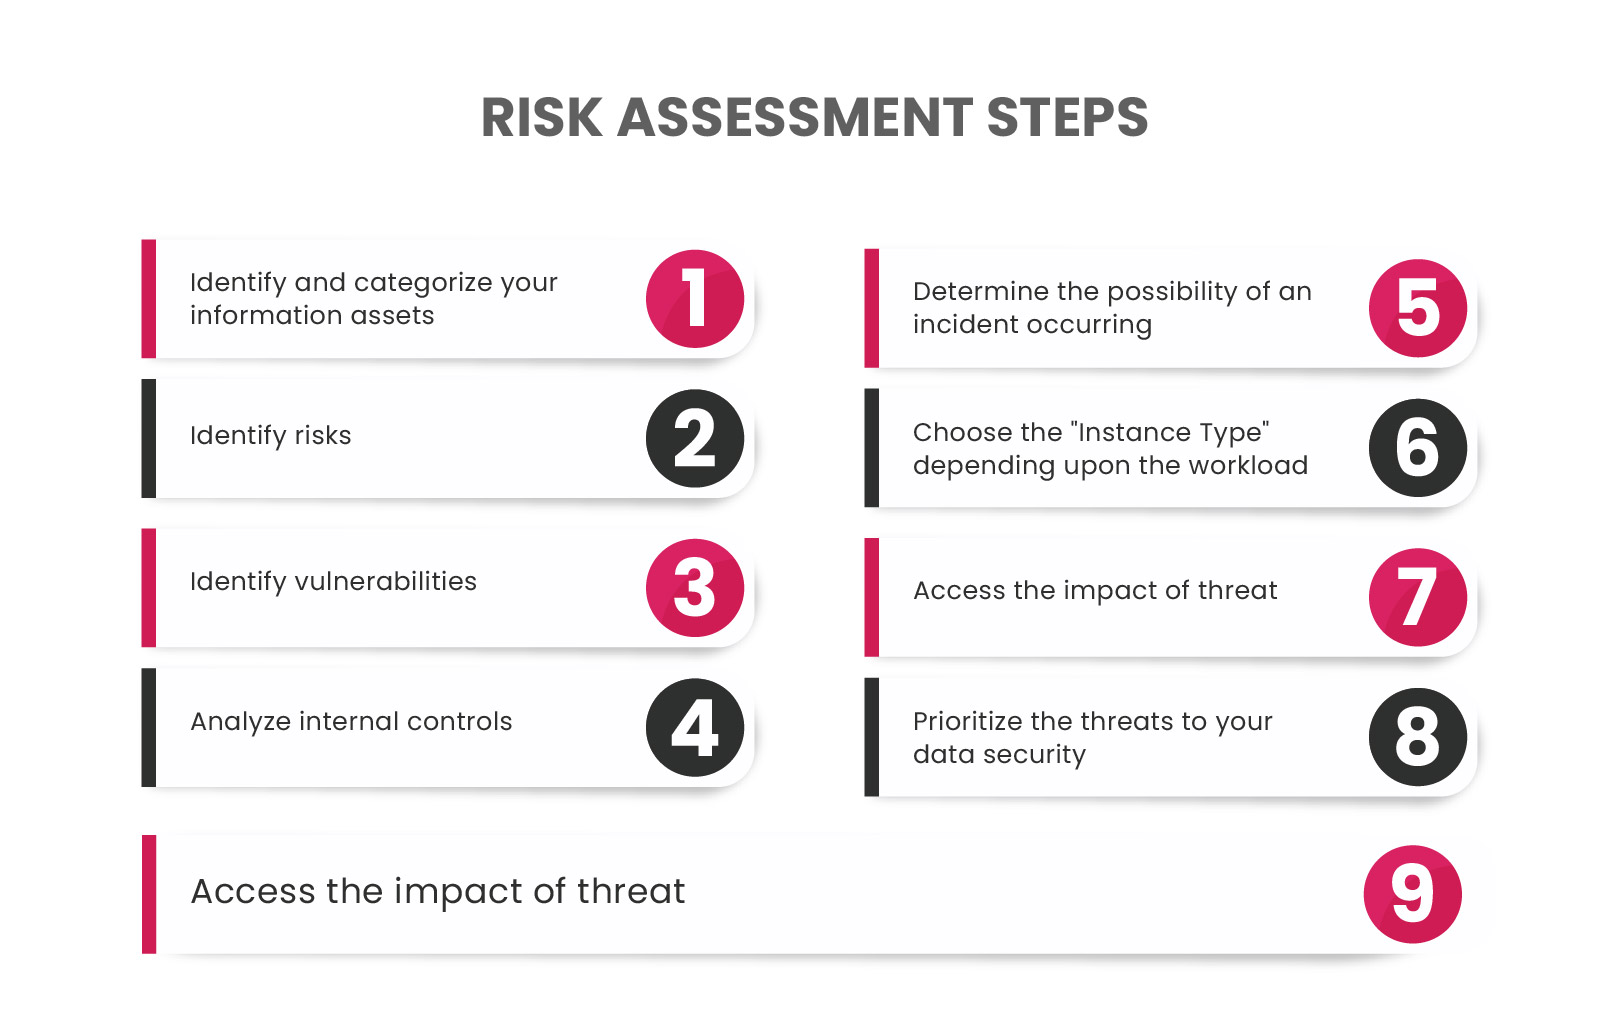 Steps in the Risk Assessment Process